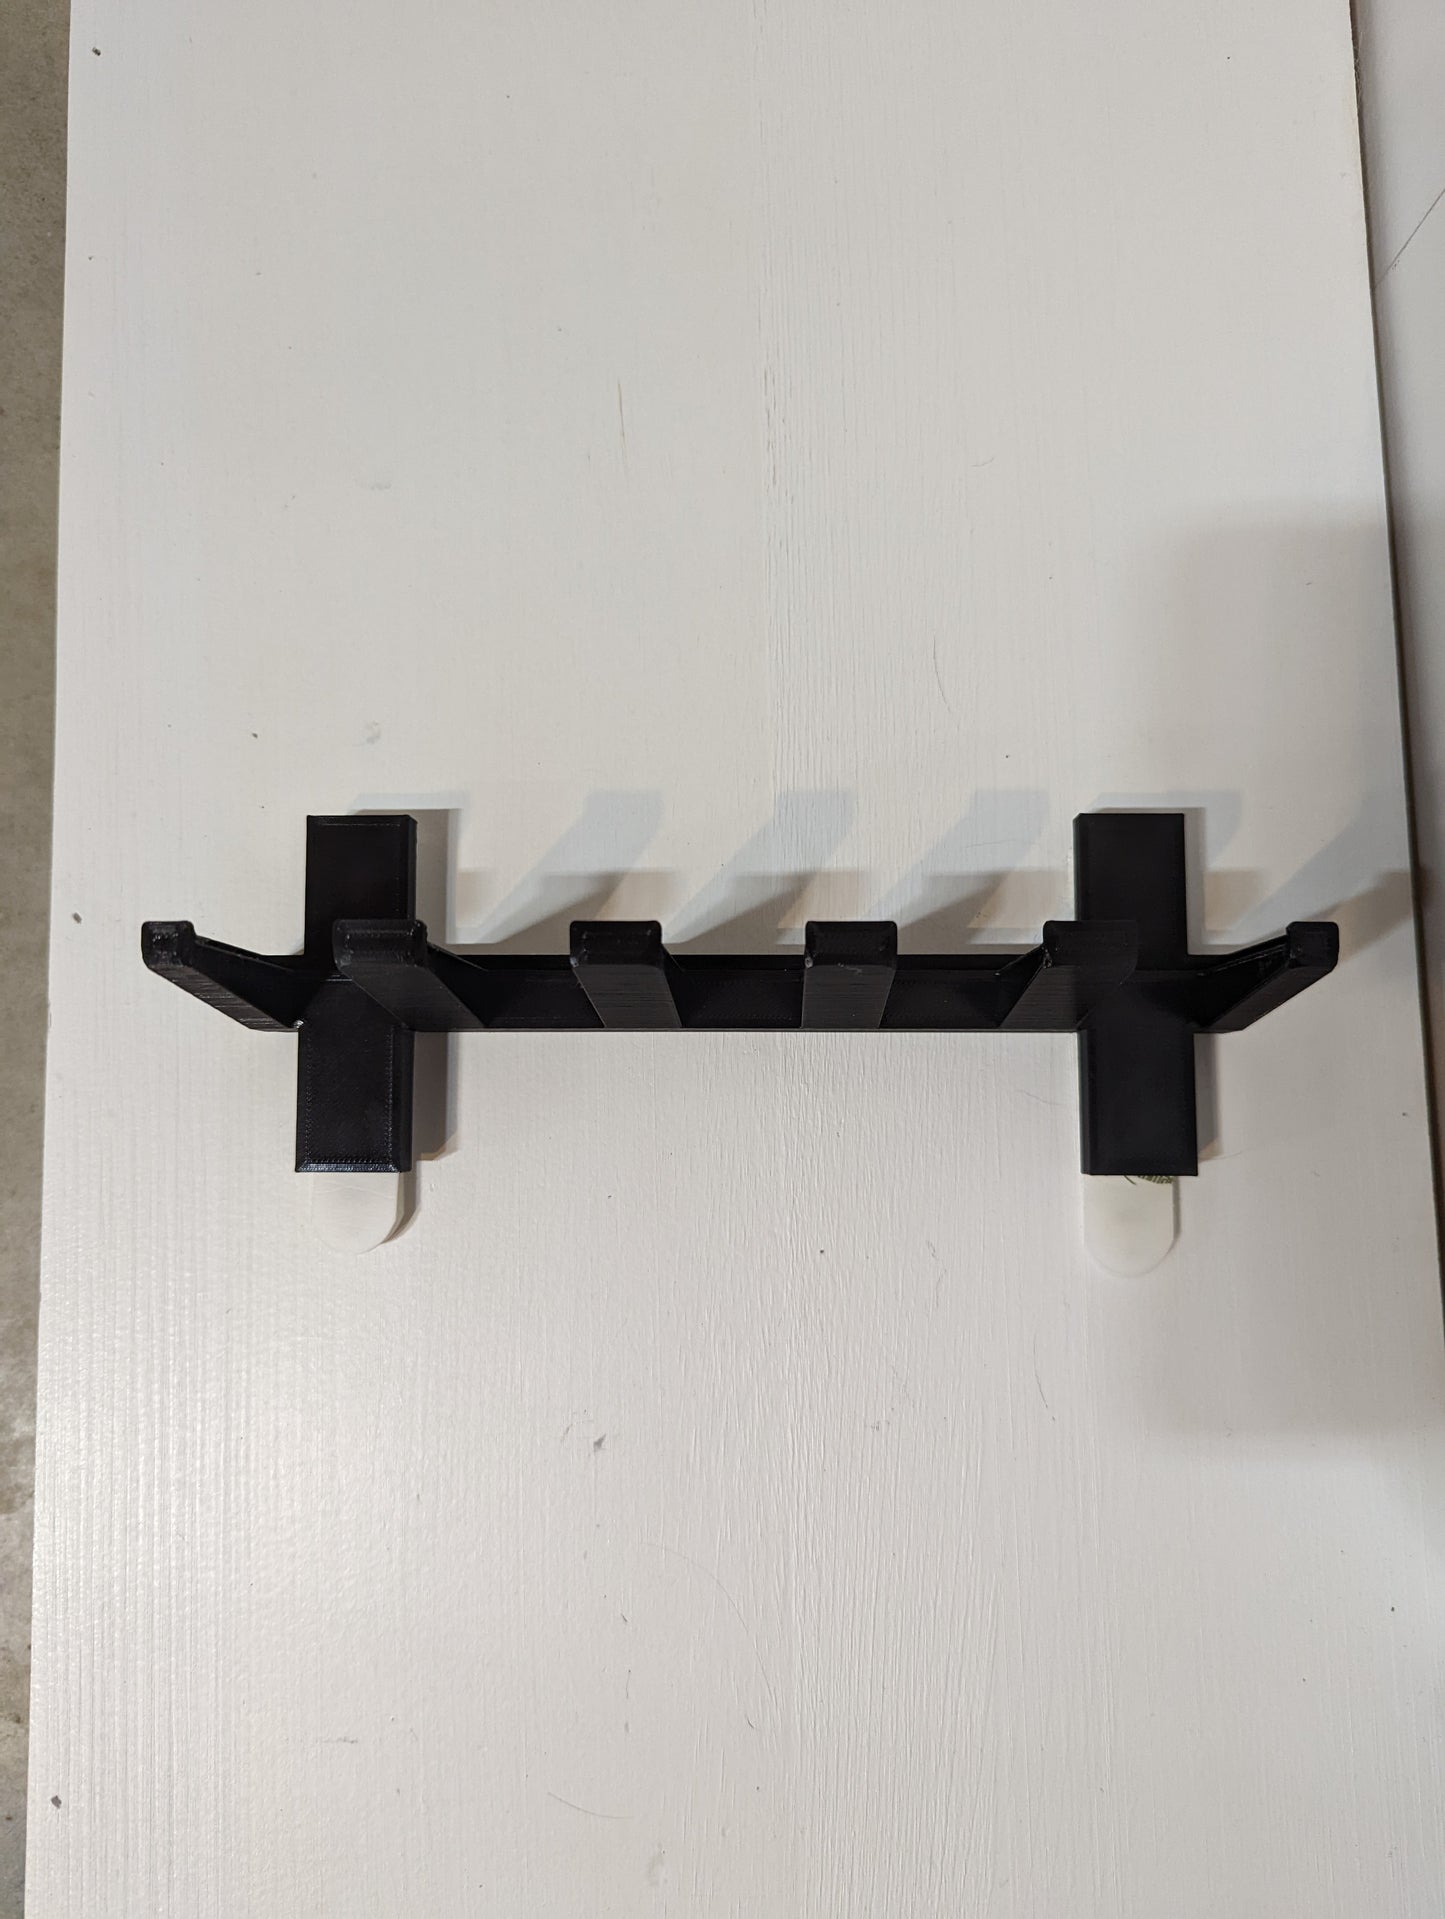 Mount for FNX 45 Tactical Mags - Command Strips | Magazine Holder Storage Rack